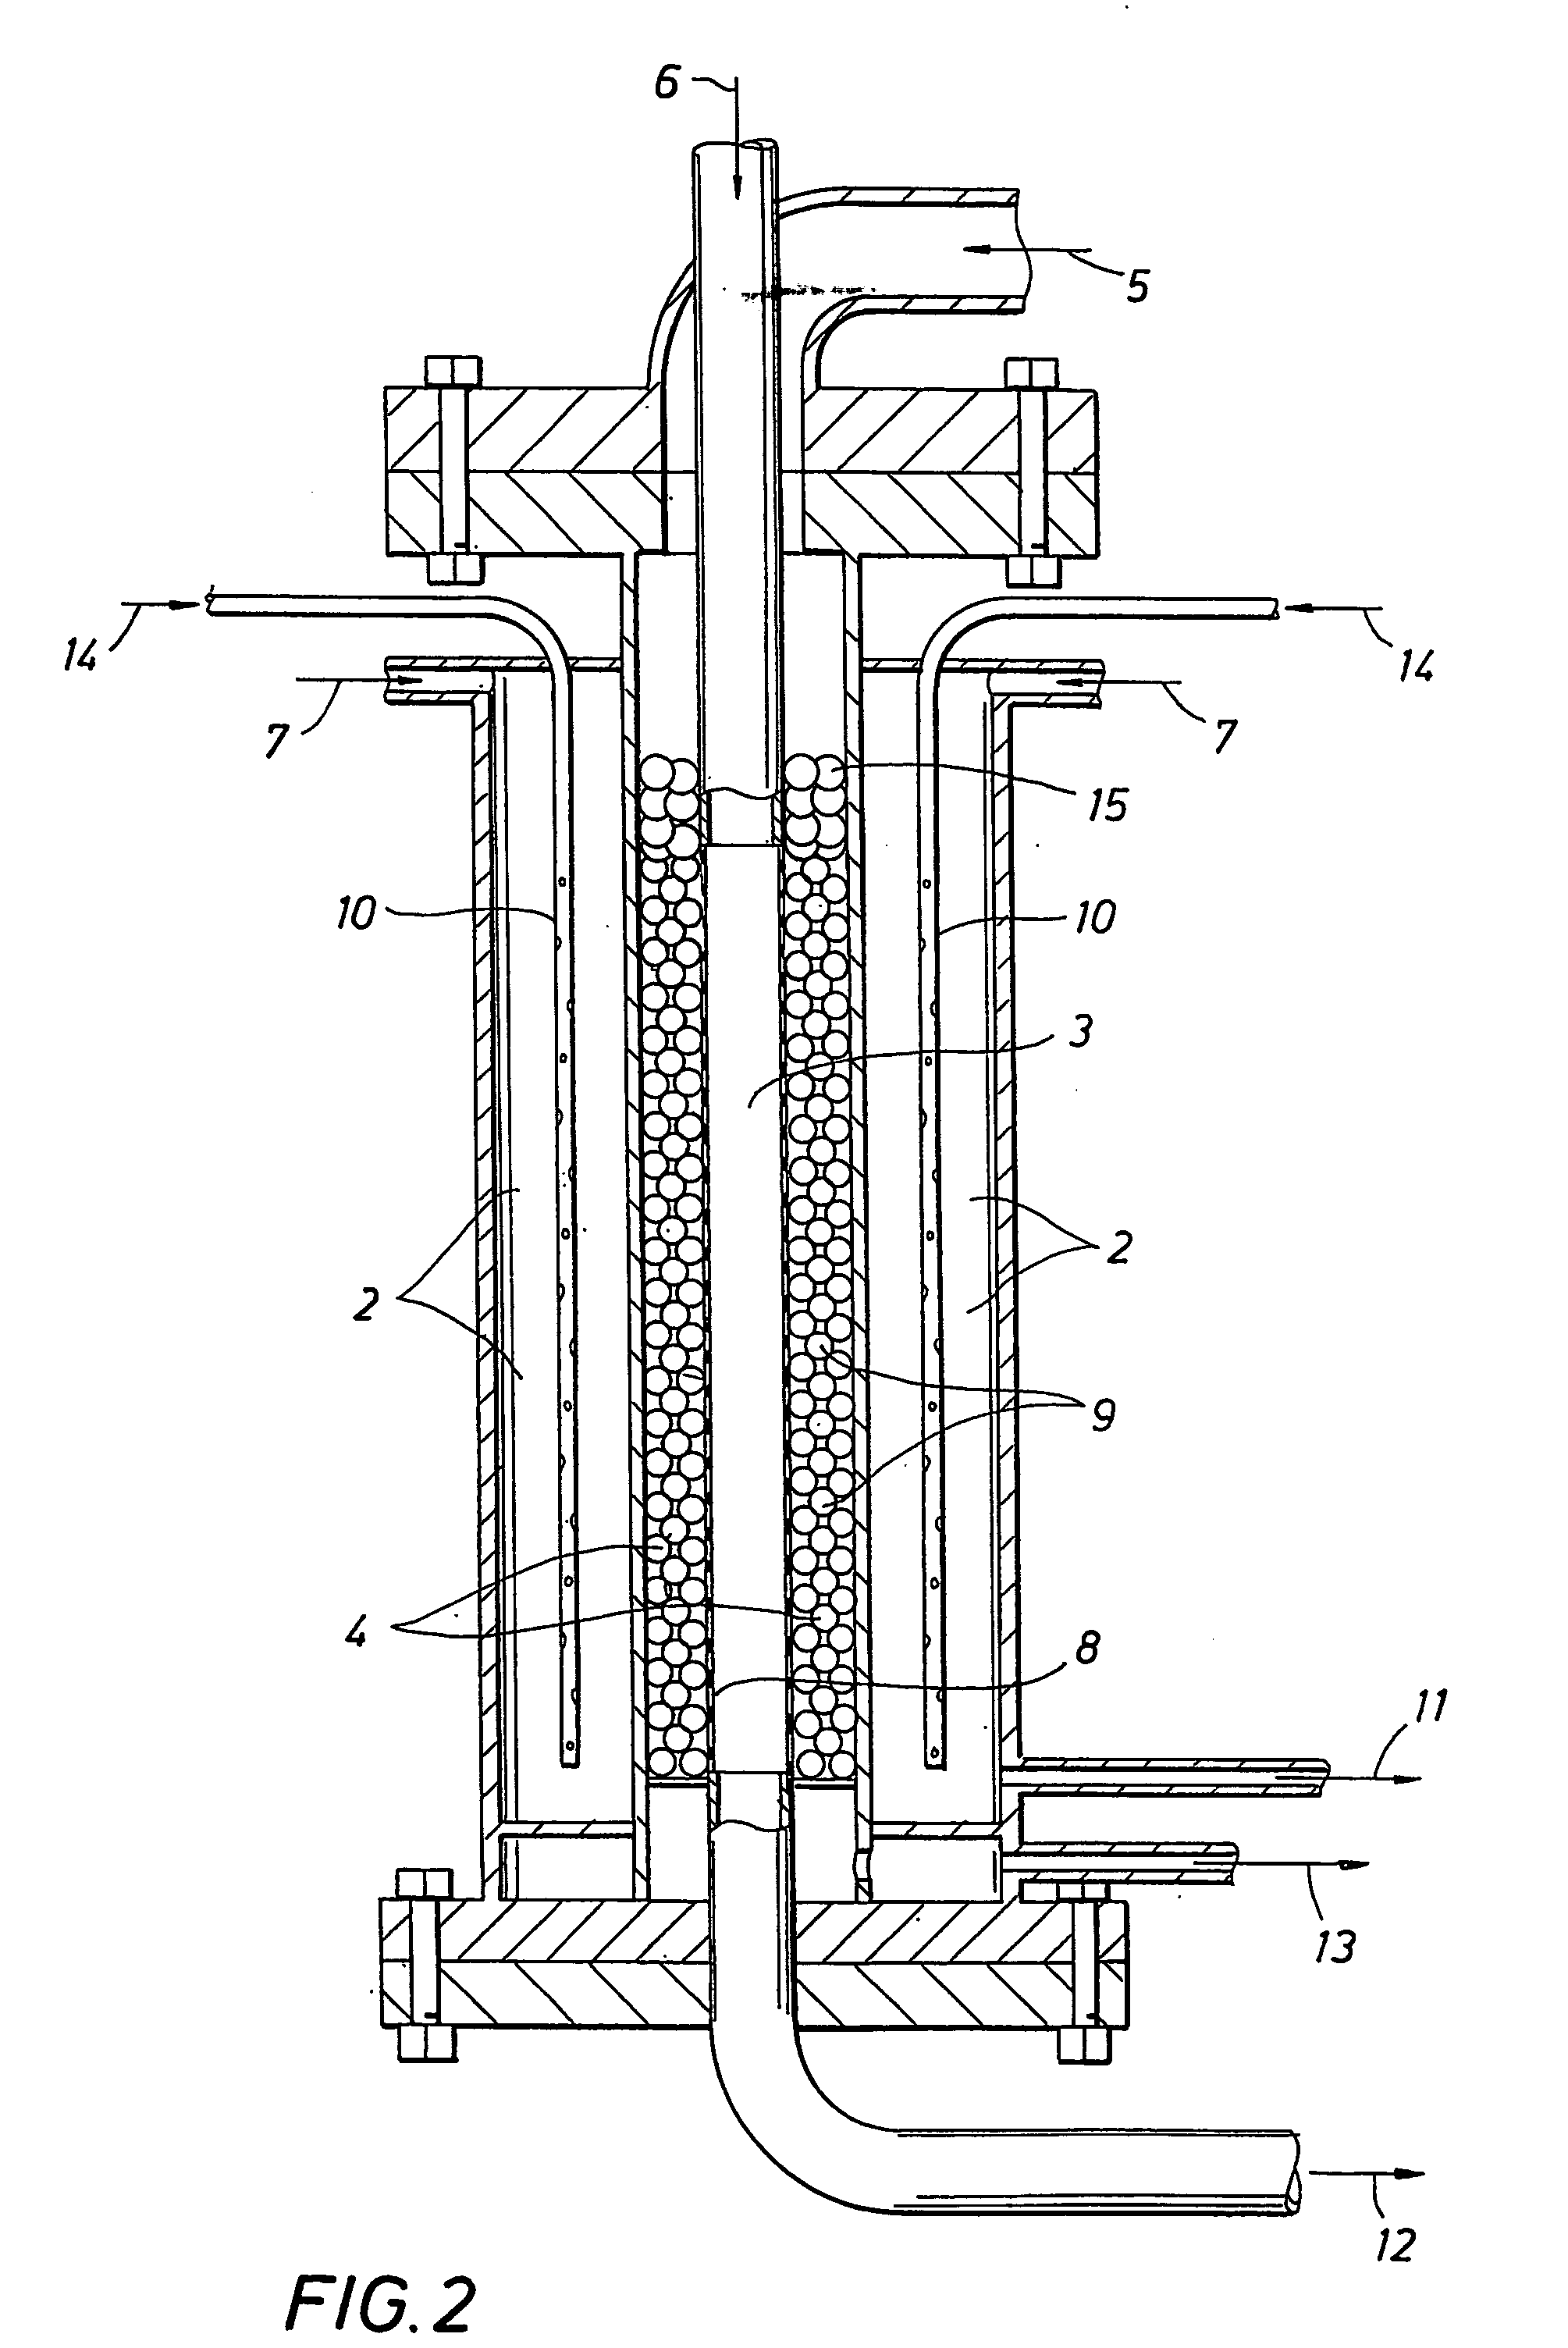 Apparatus and process for production of high purity hydrogen